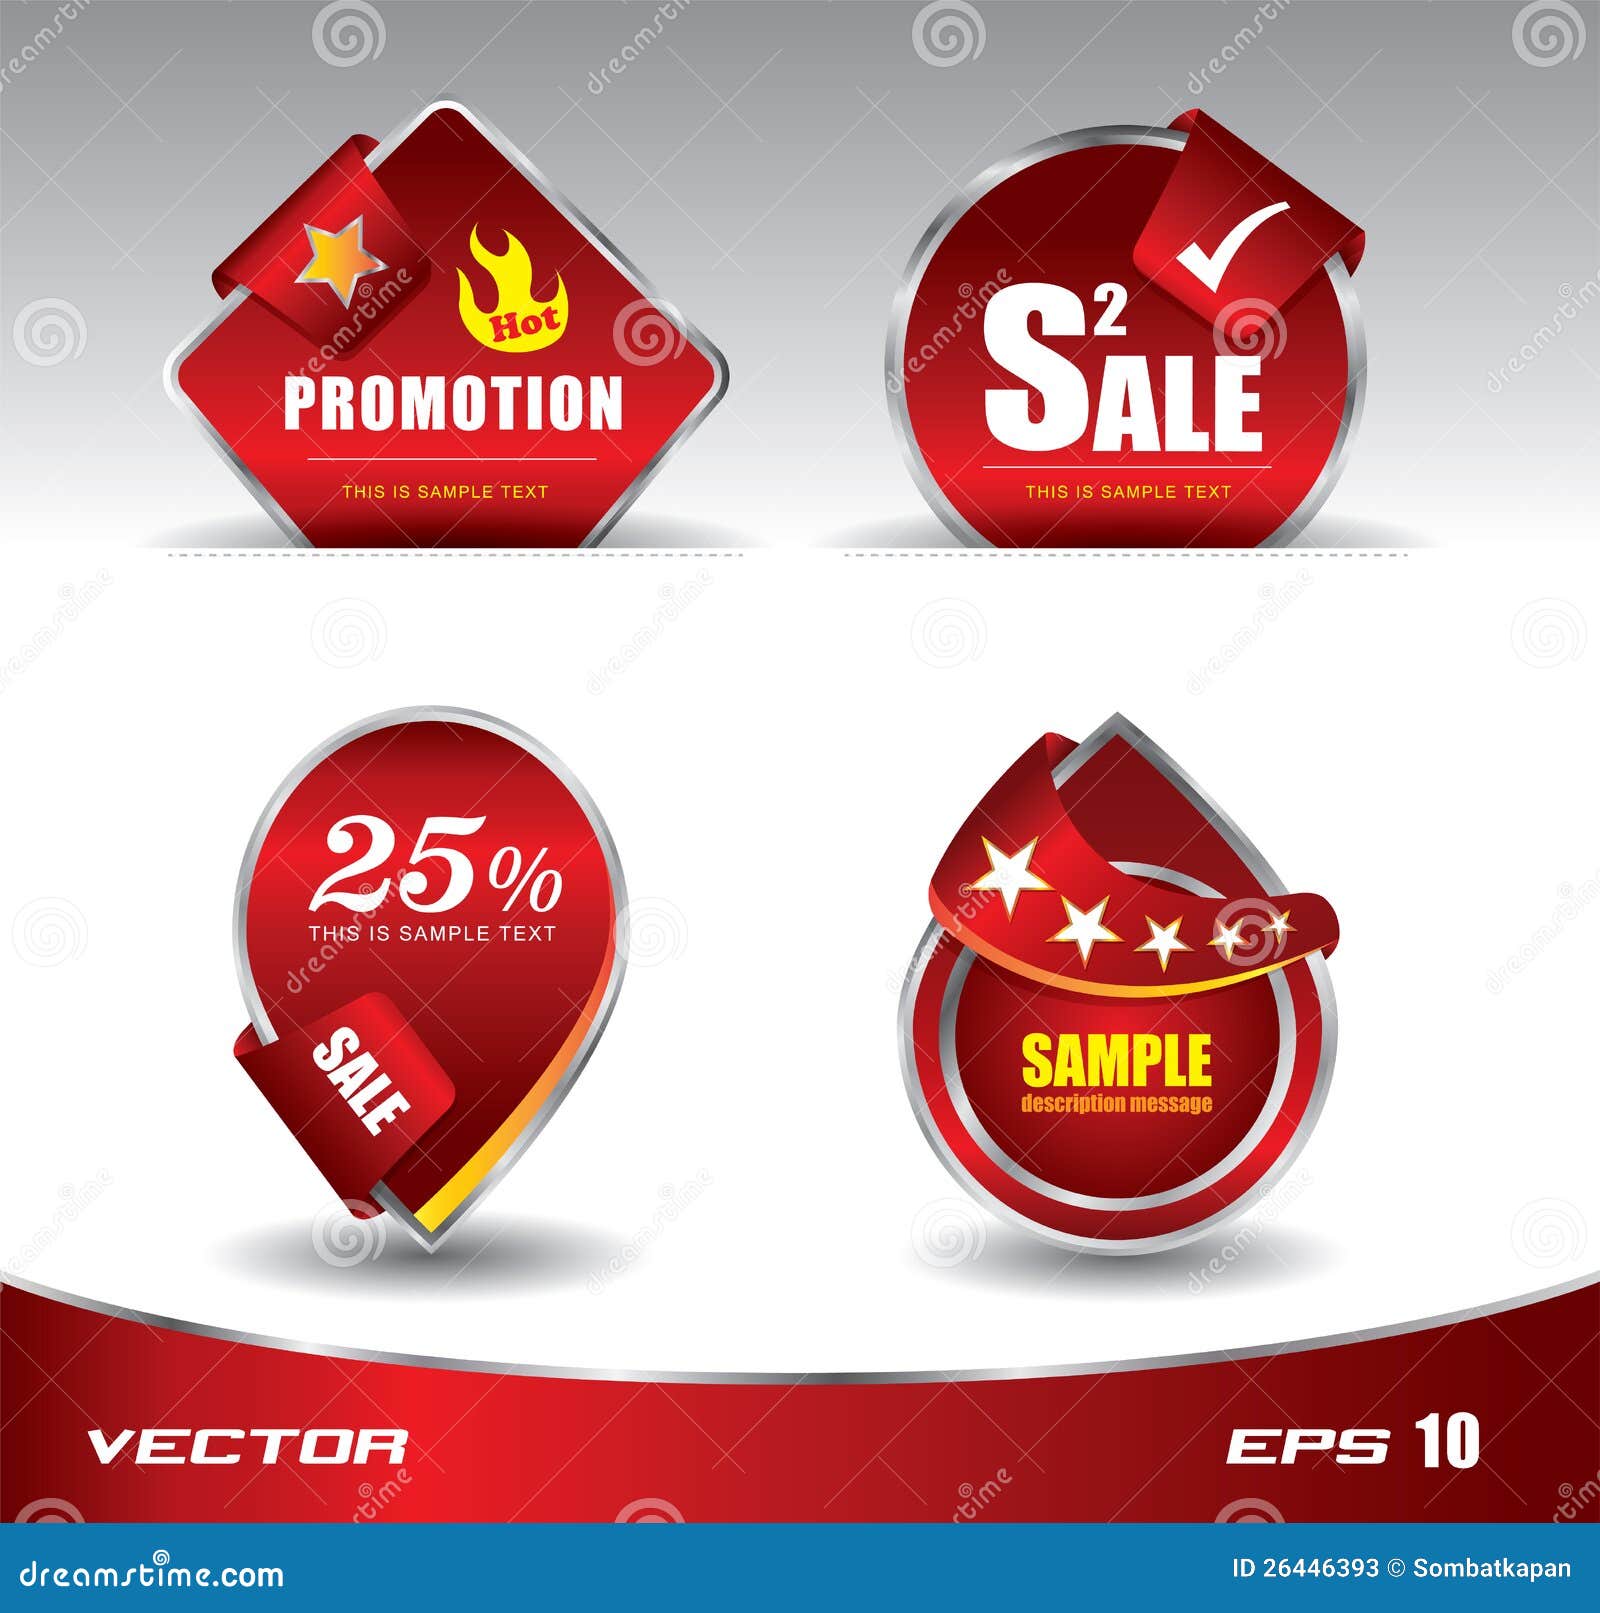 promotion sale red